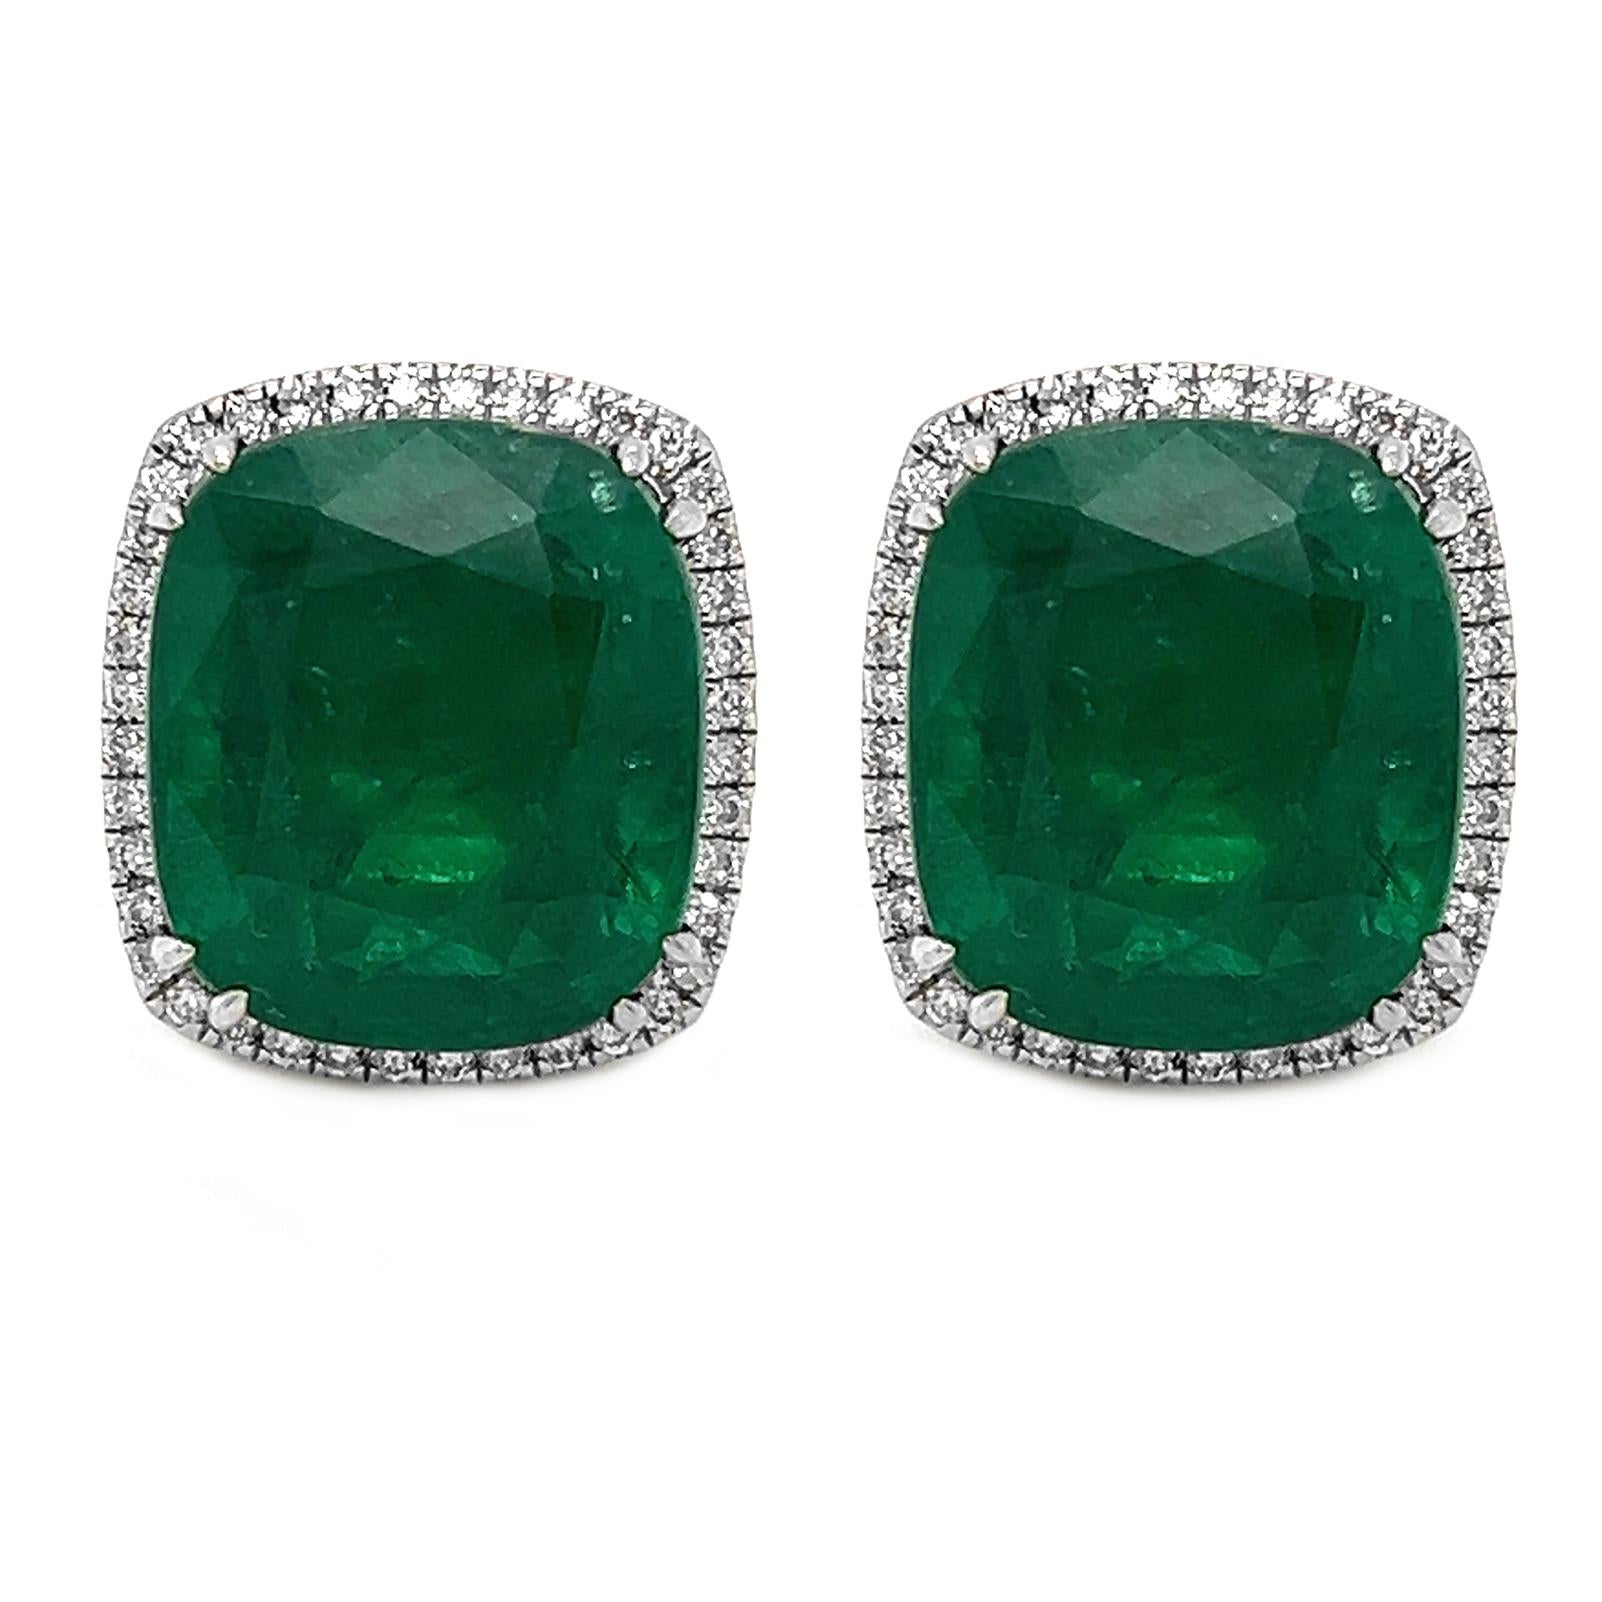 Elevate your elegance with these extraordinary 19.23 Total Weight (T.W) Natural Mined Emerald Cushion Diamond Cluster Halo Convertible Earrings in luxurious 18KT White Gold. These earrings are a true testament to the allure of emeralds and the